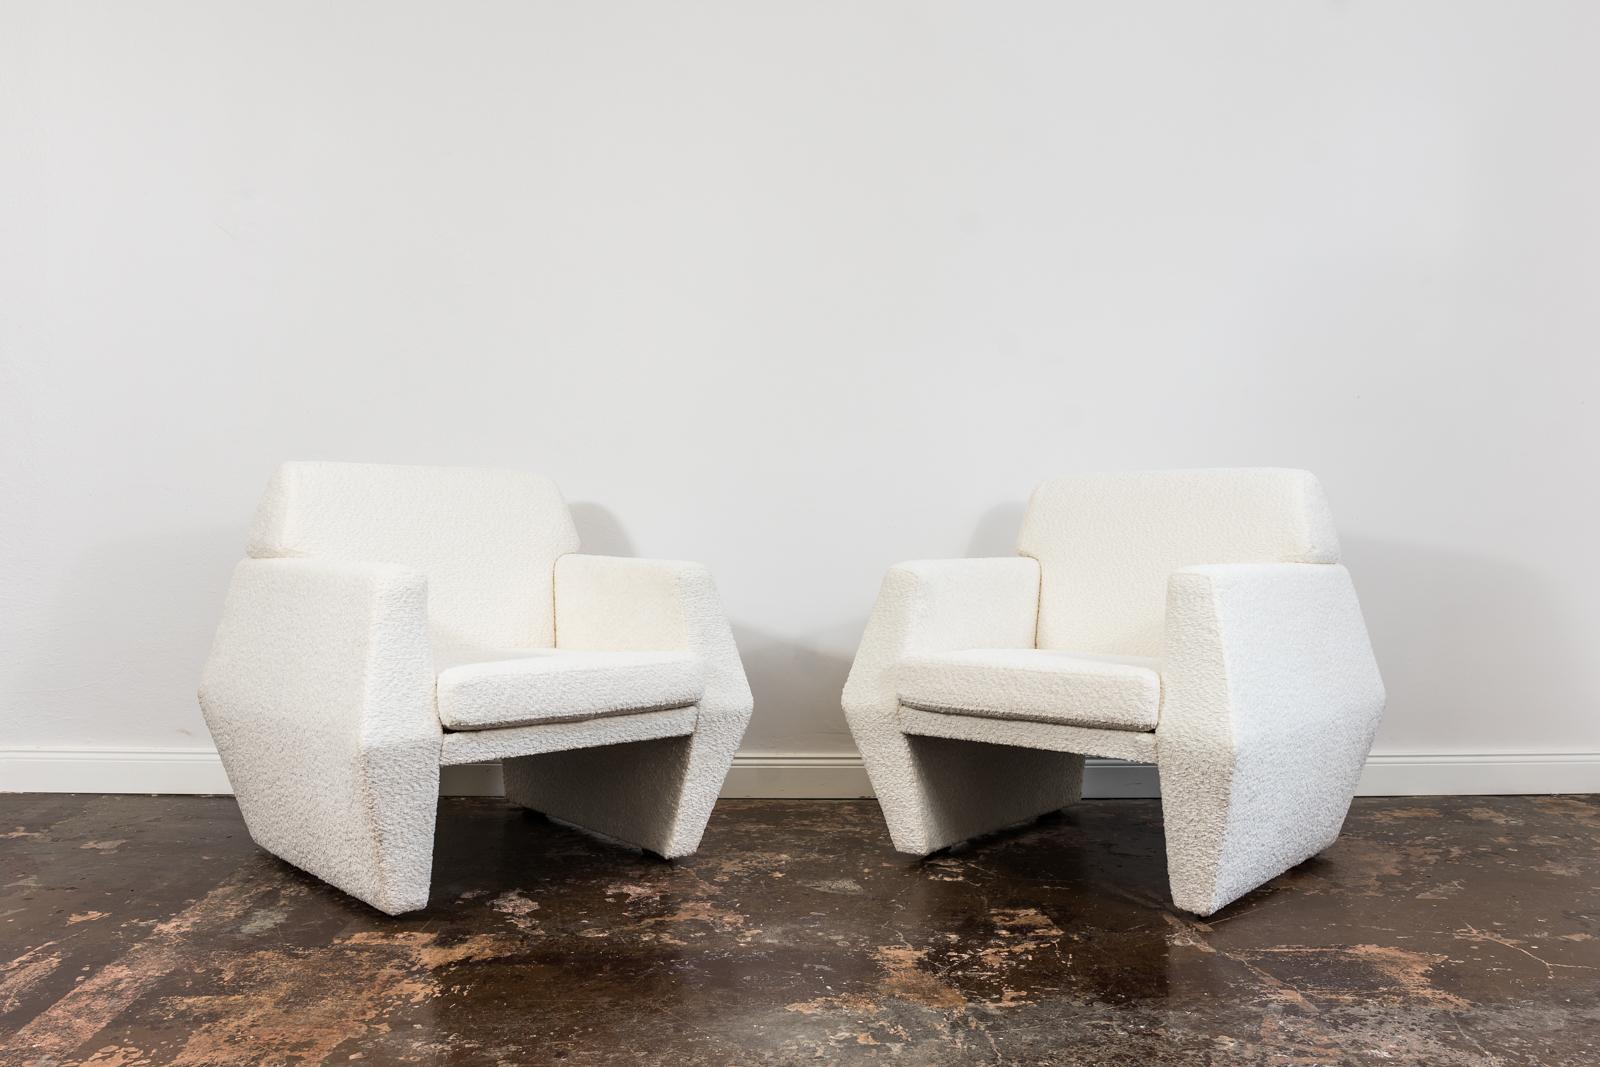 Customizable Pair Of Lounge Chairs from Lubuskie Fabryki Mebli, 1970s
Lounge chairs have been reupholstered in white soft fabric.
We offer fabric customization upon request.